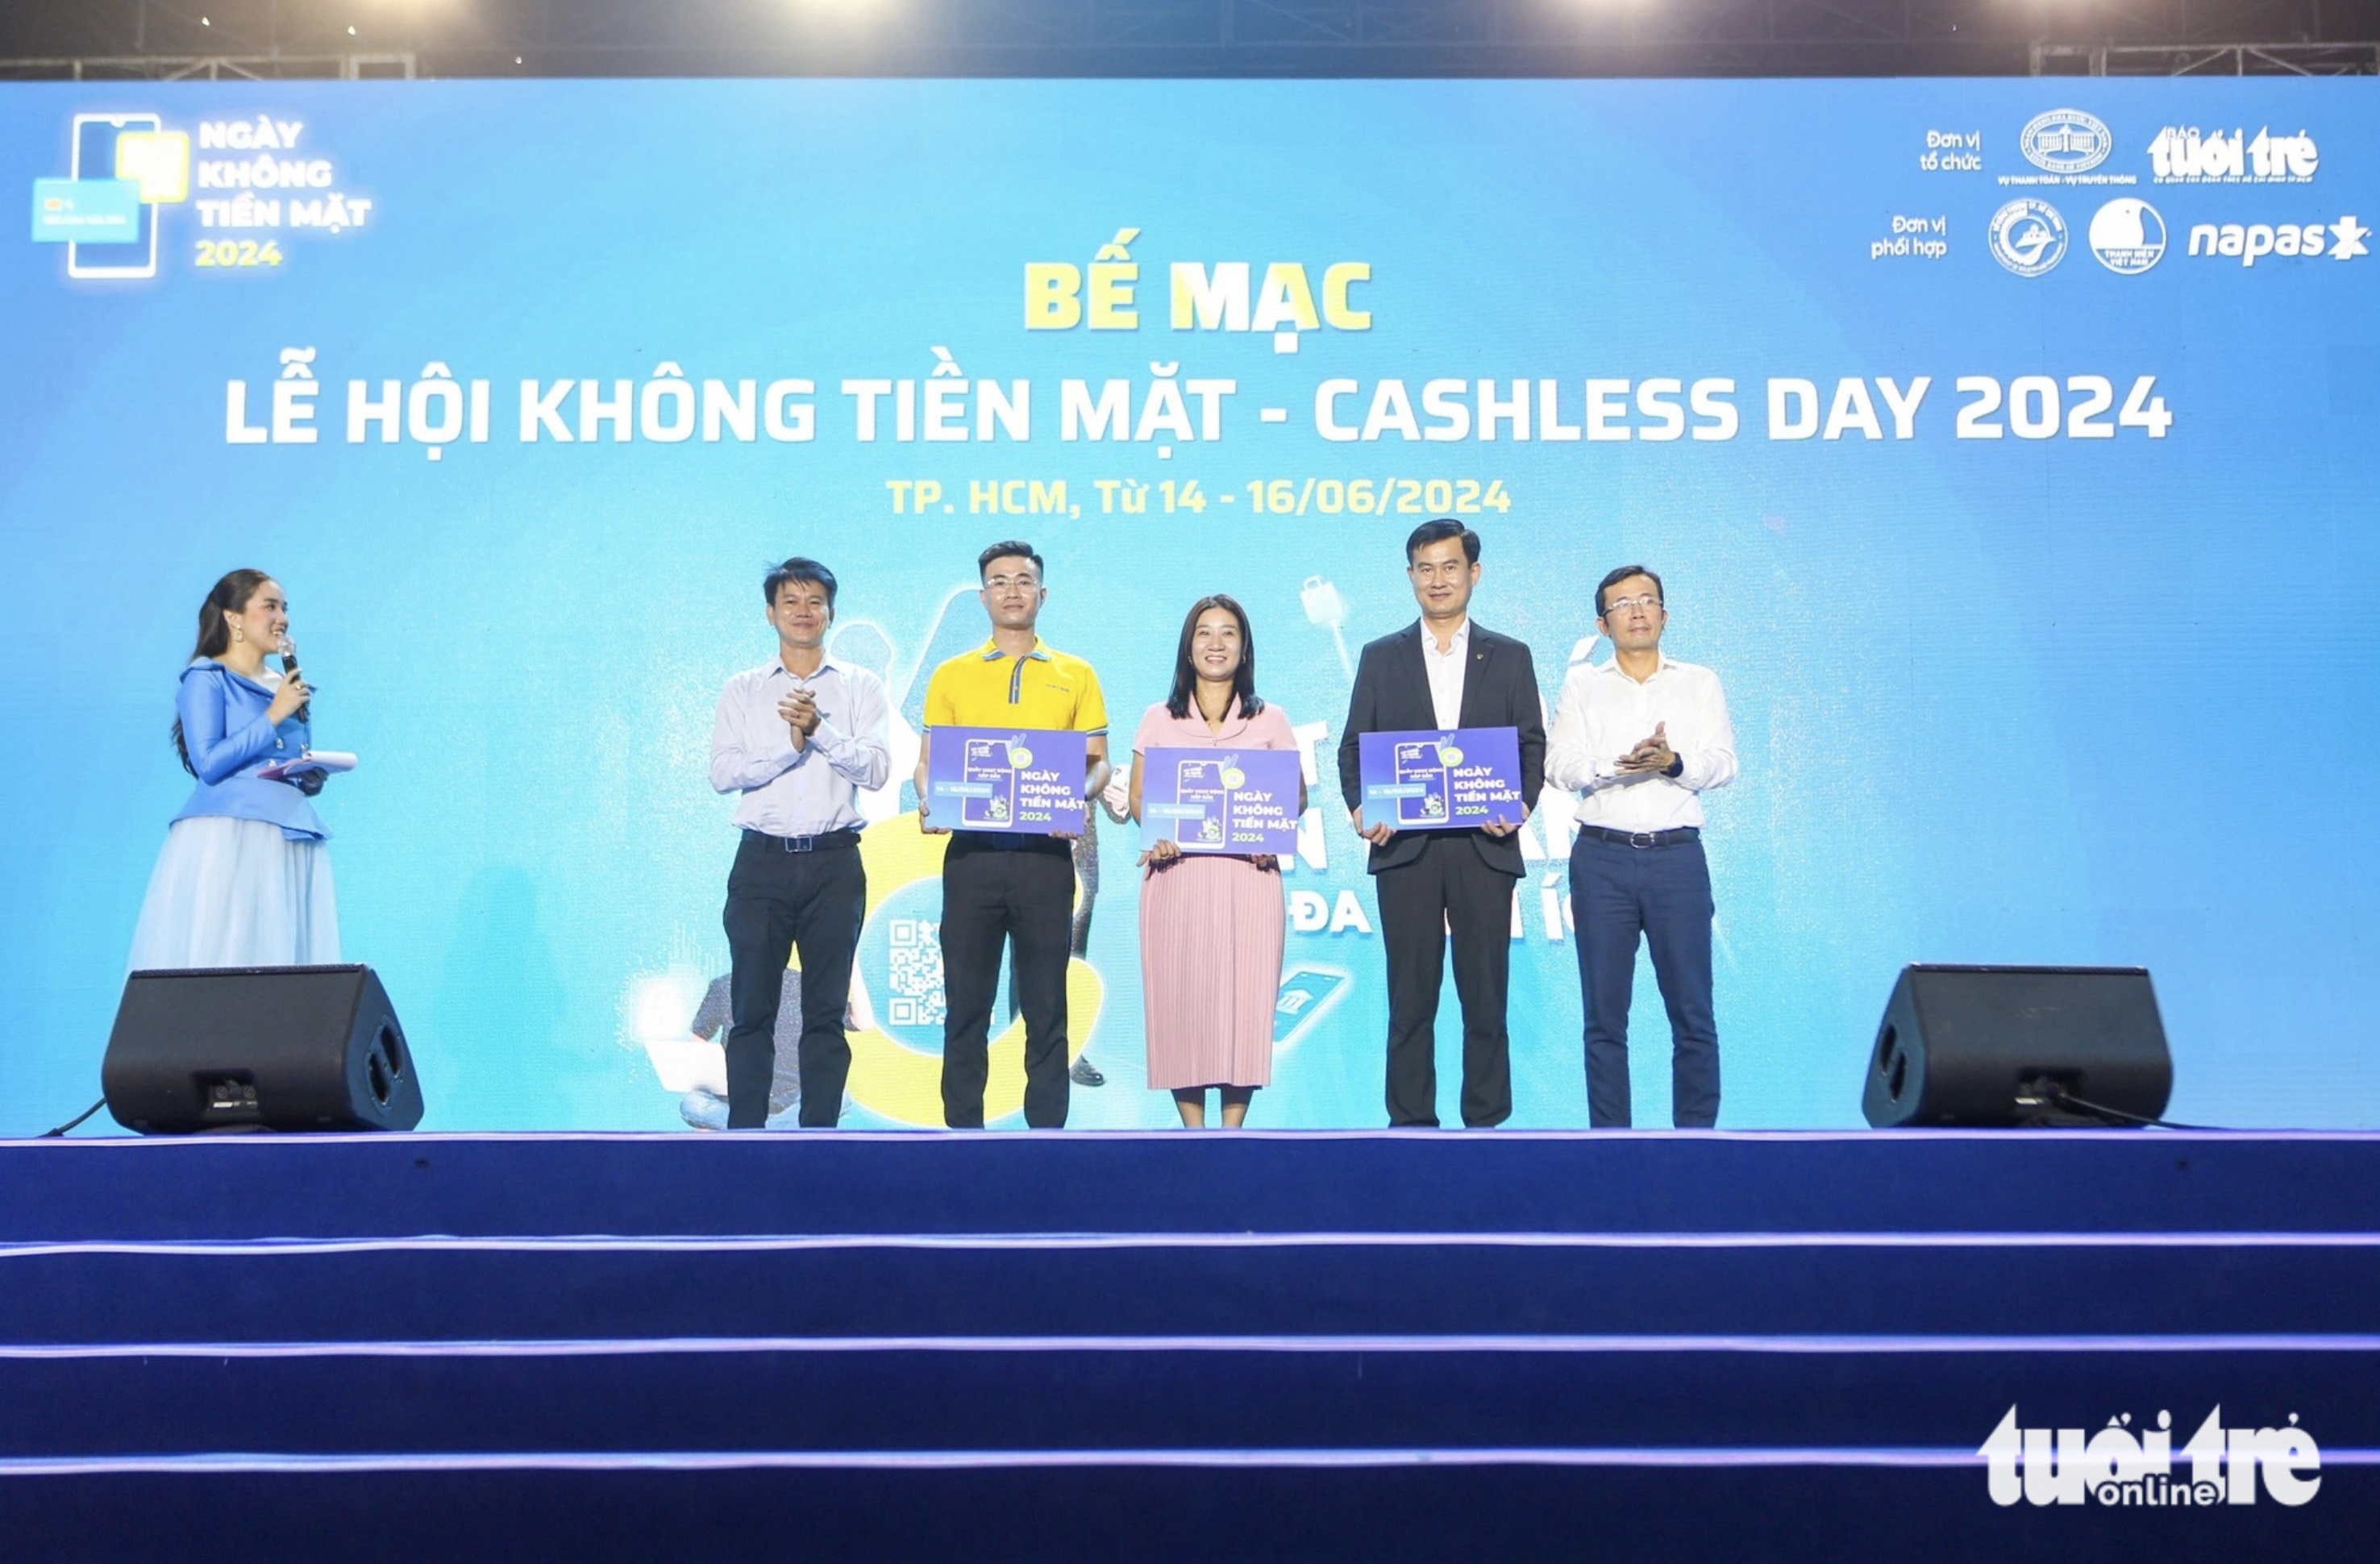 Nam A Bank, Techcombank and Vietcombank win prizes for ‘Booths with fascinating activities.’ Photo: Phuong Quyen / Tuoi Tre